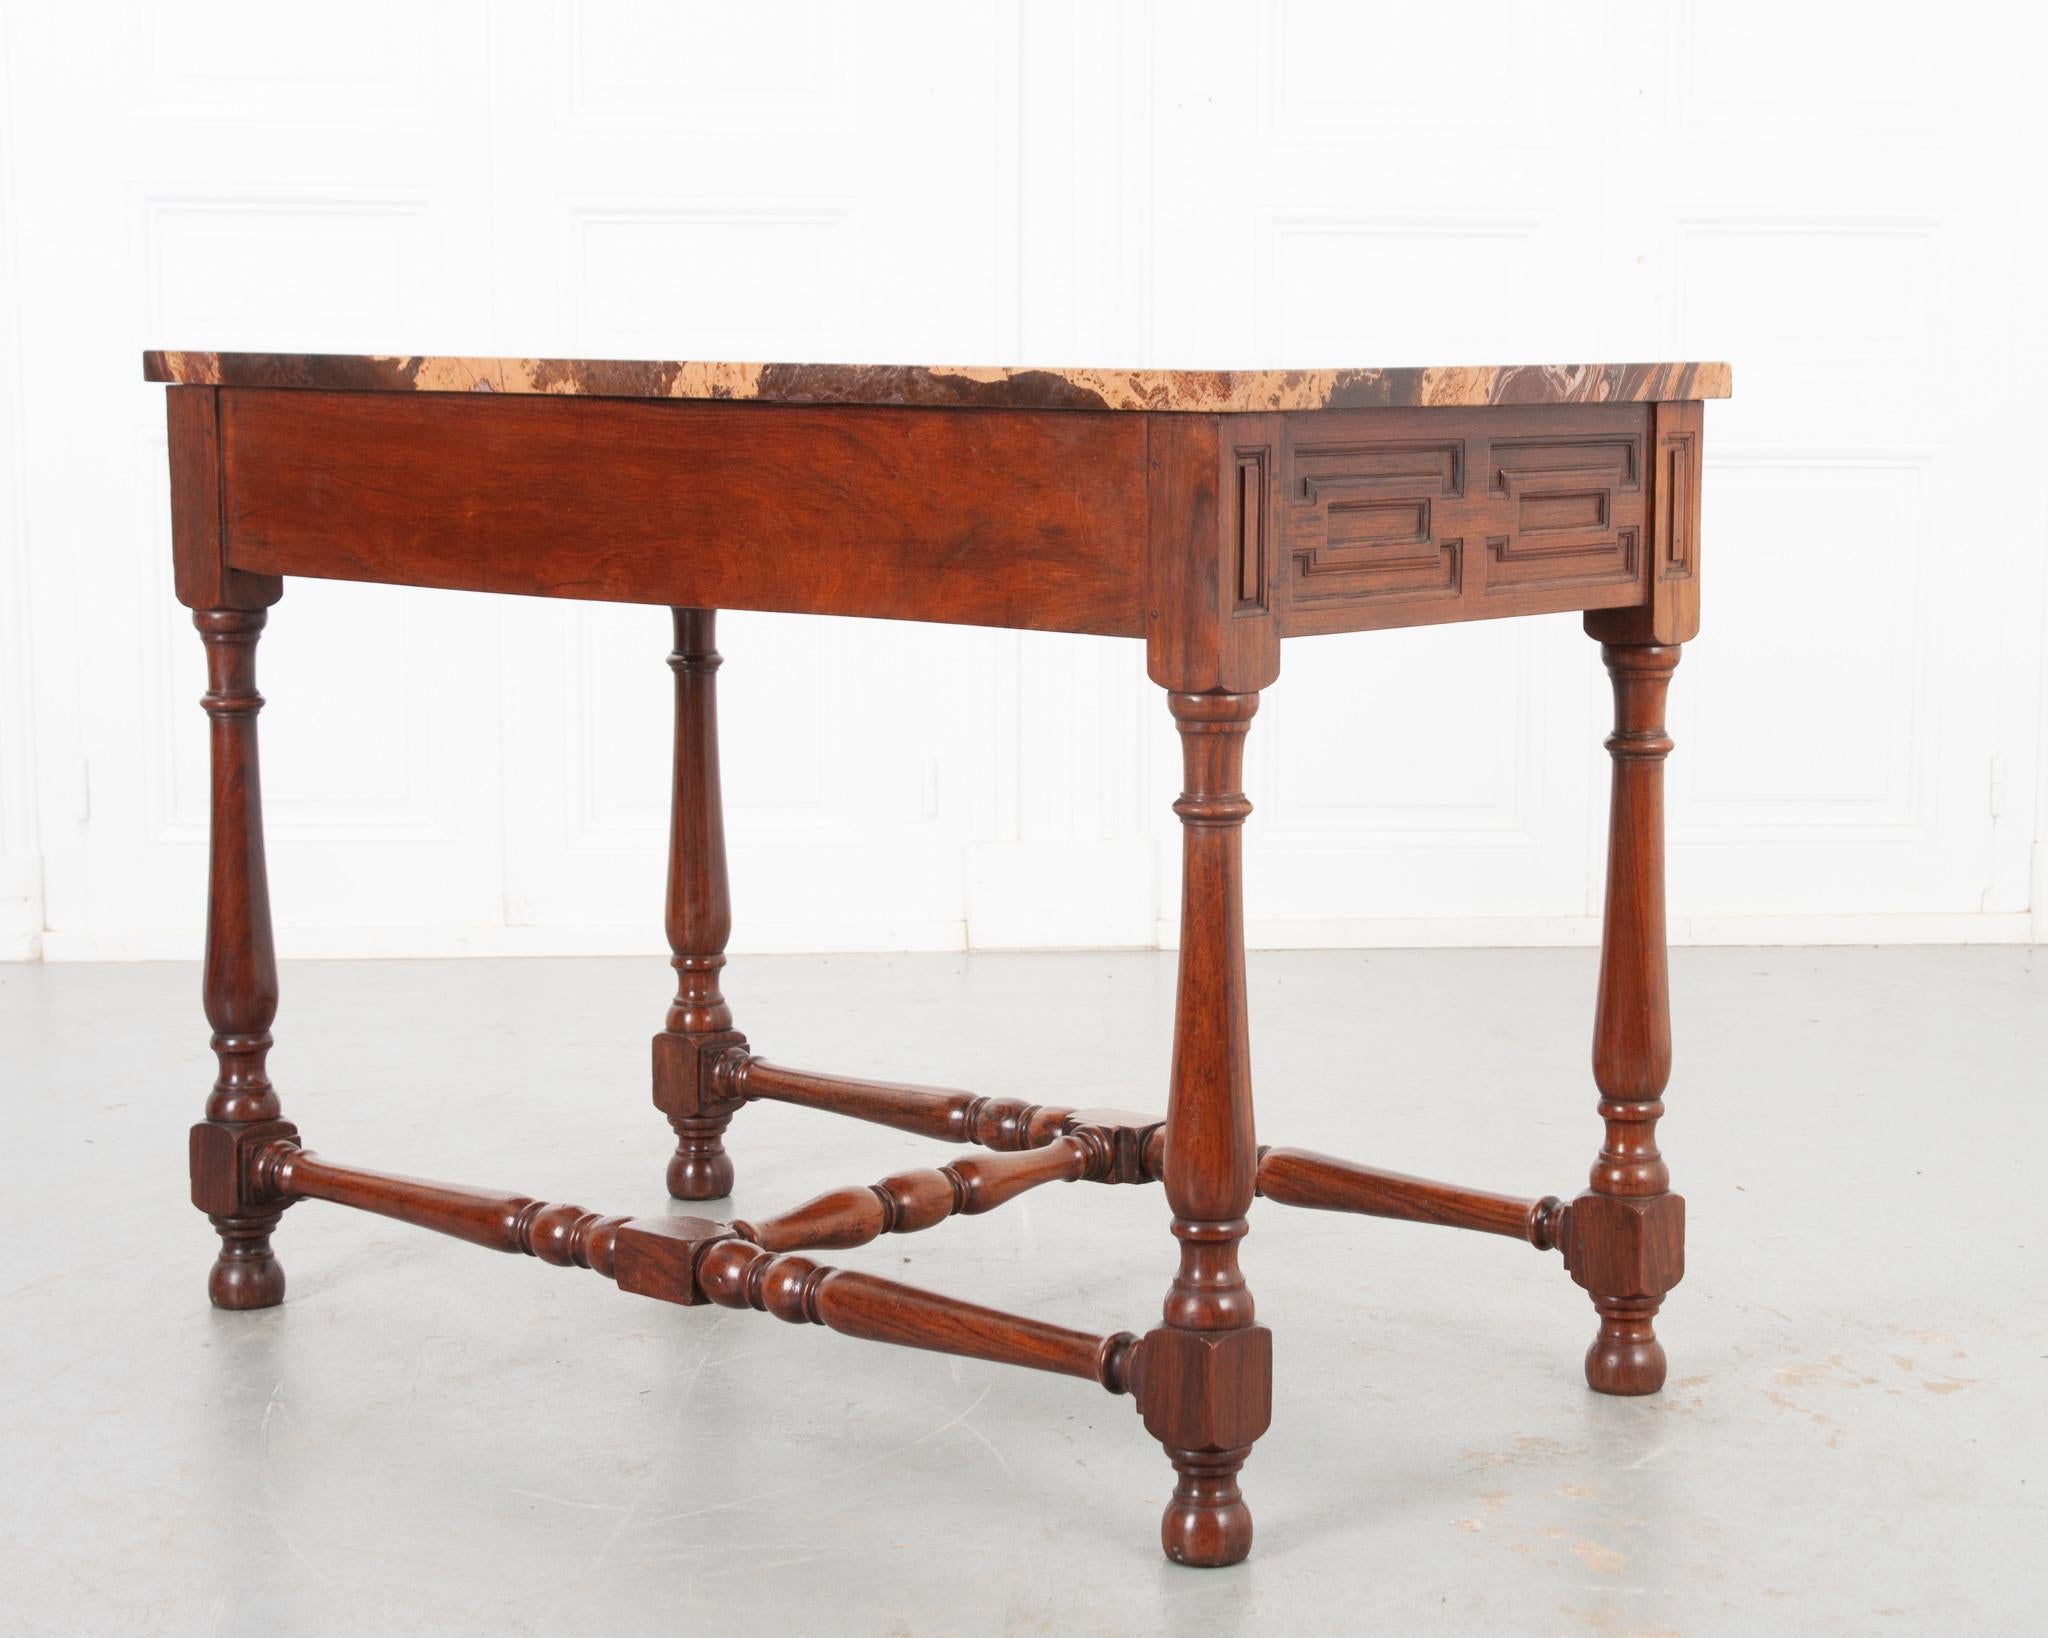 An absolutely stunning center table for any space! The gorgeous new marble top perfectly compliments the warm toned rosewood base. Quality craftsmanship is evident in the artfully carved geometric panels on each end of the table and beautiful turned